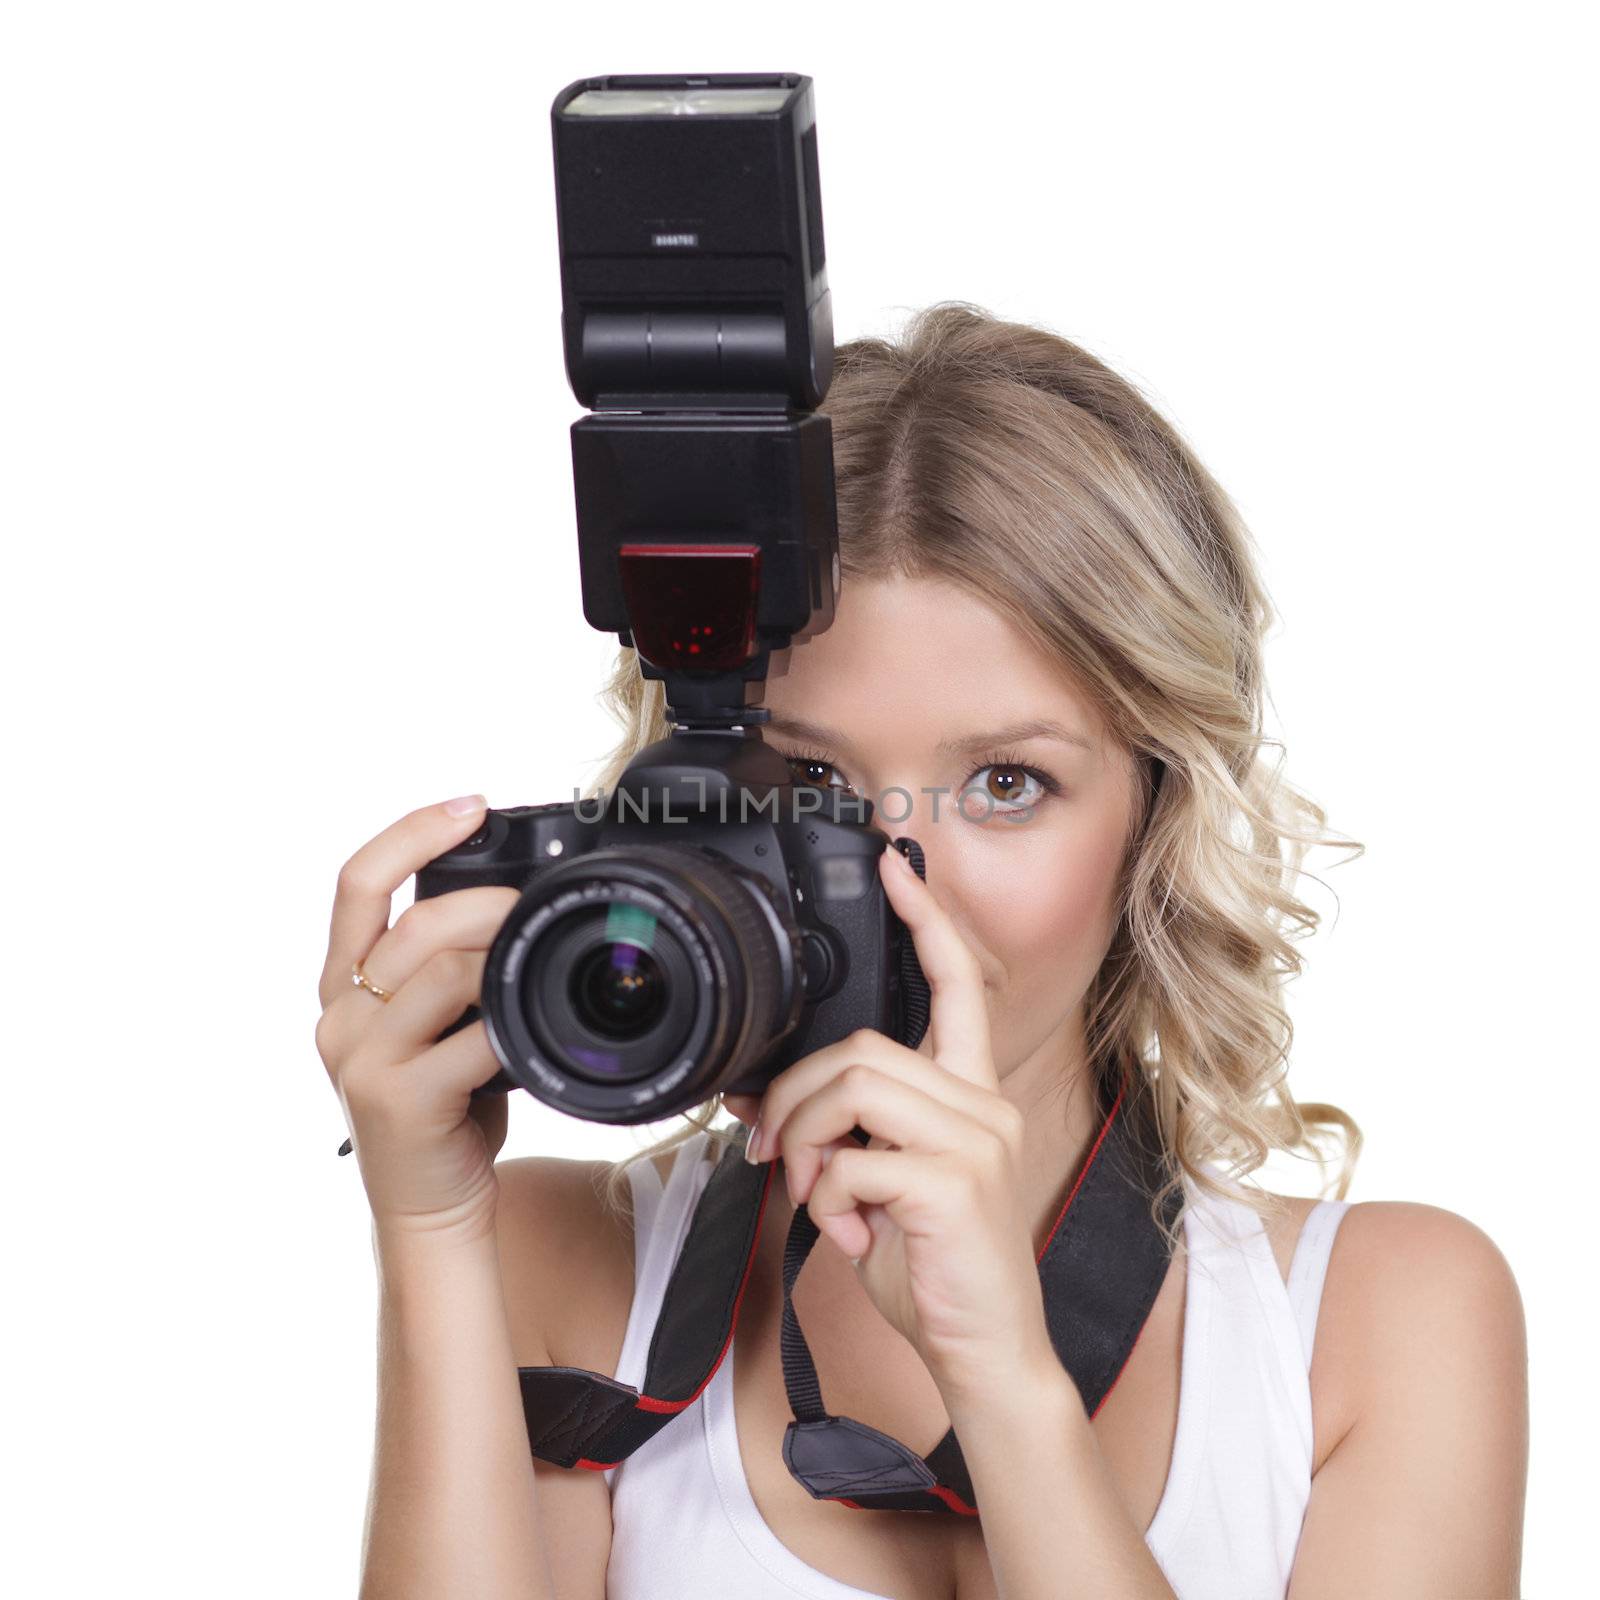 Cheerful woman shooting with a camera against white background